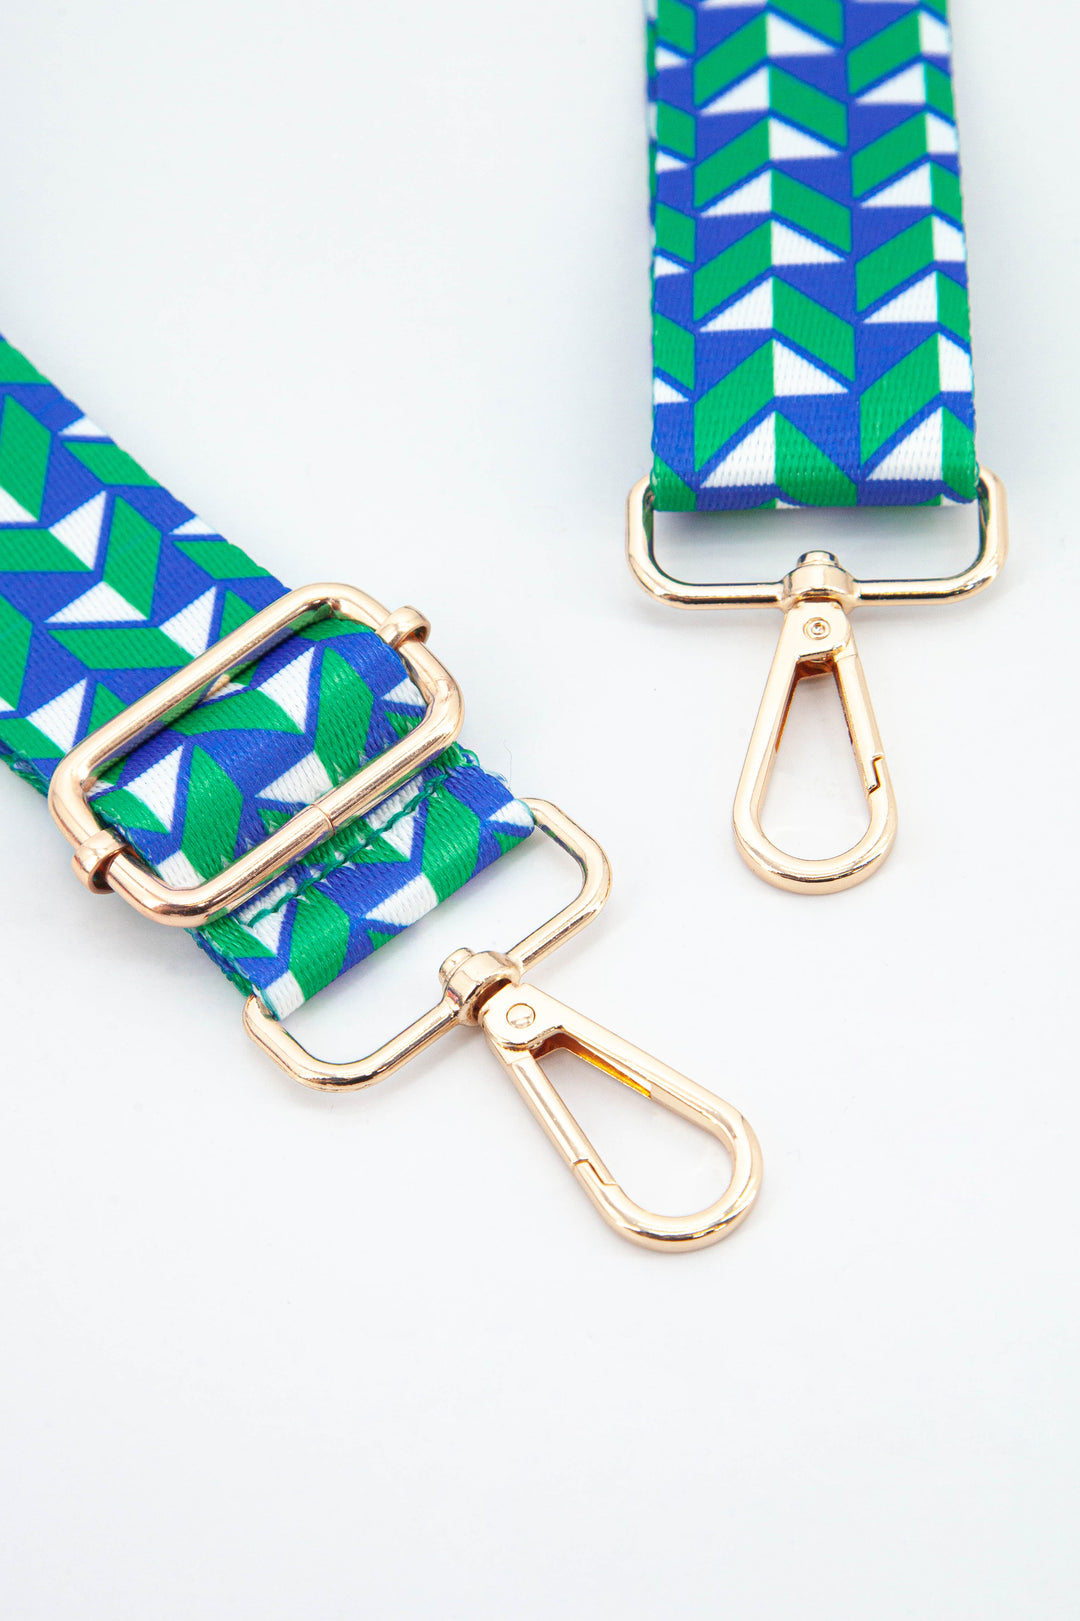 close up of the gold clip on snap hook attachments and the green and blue 3d effect chevron pattern